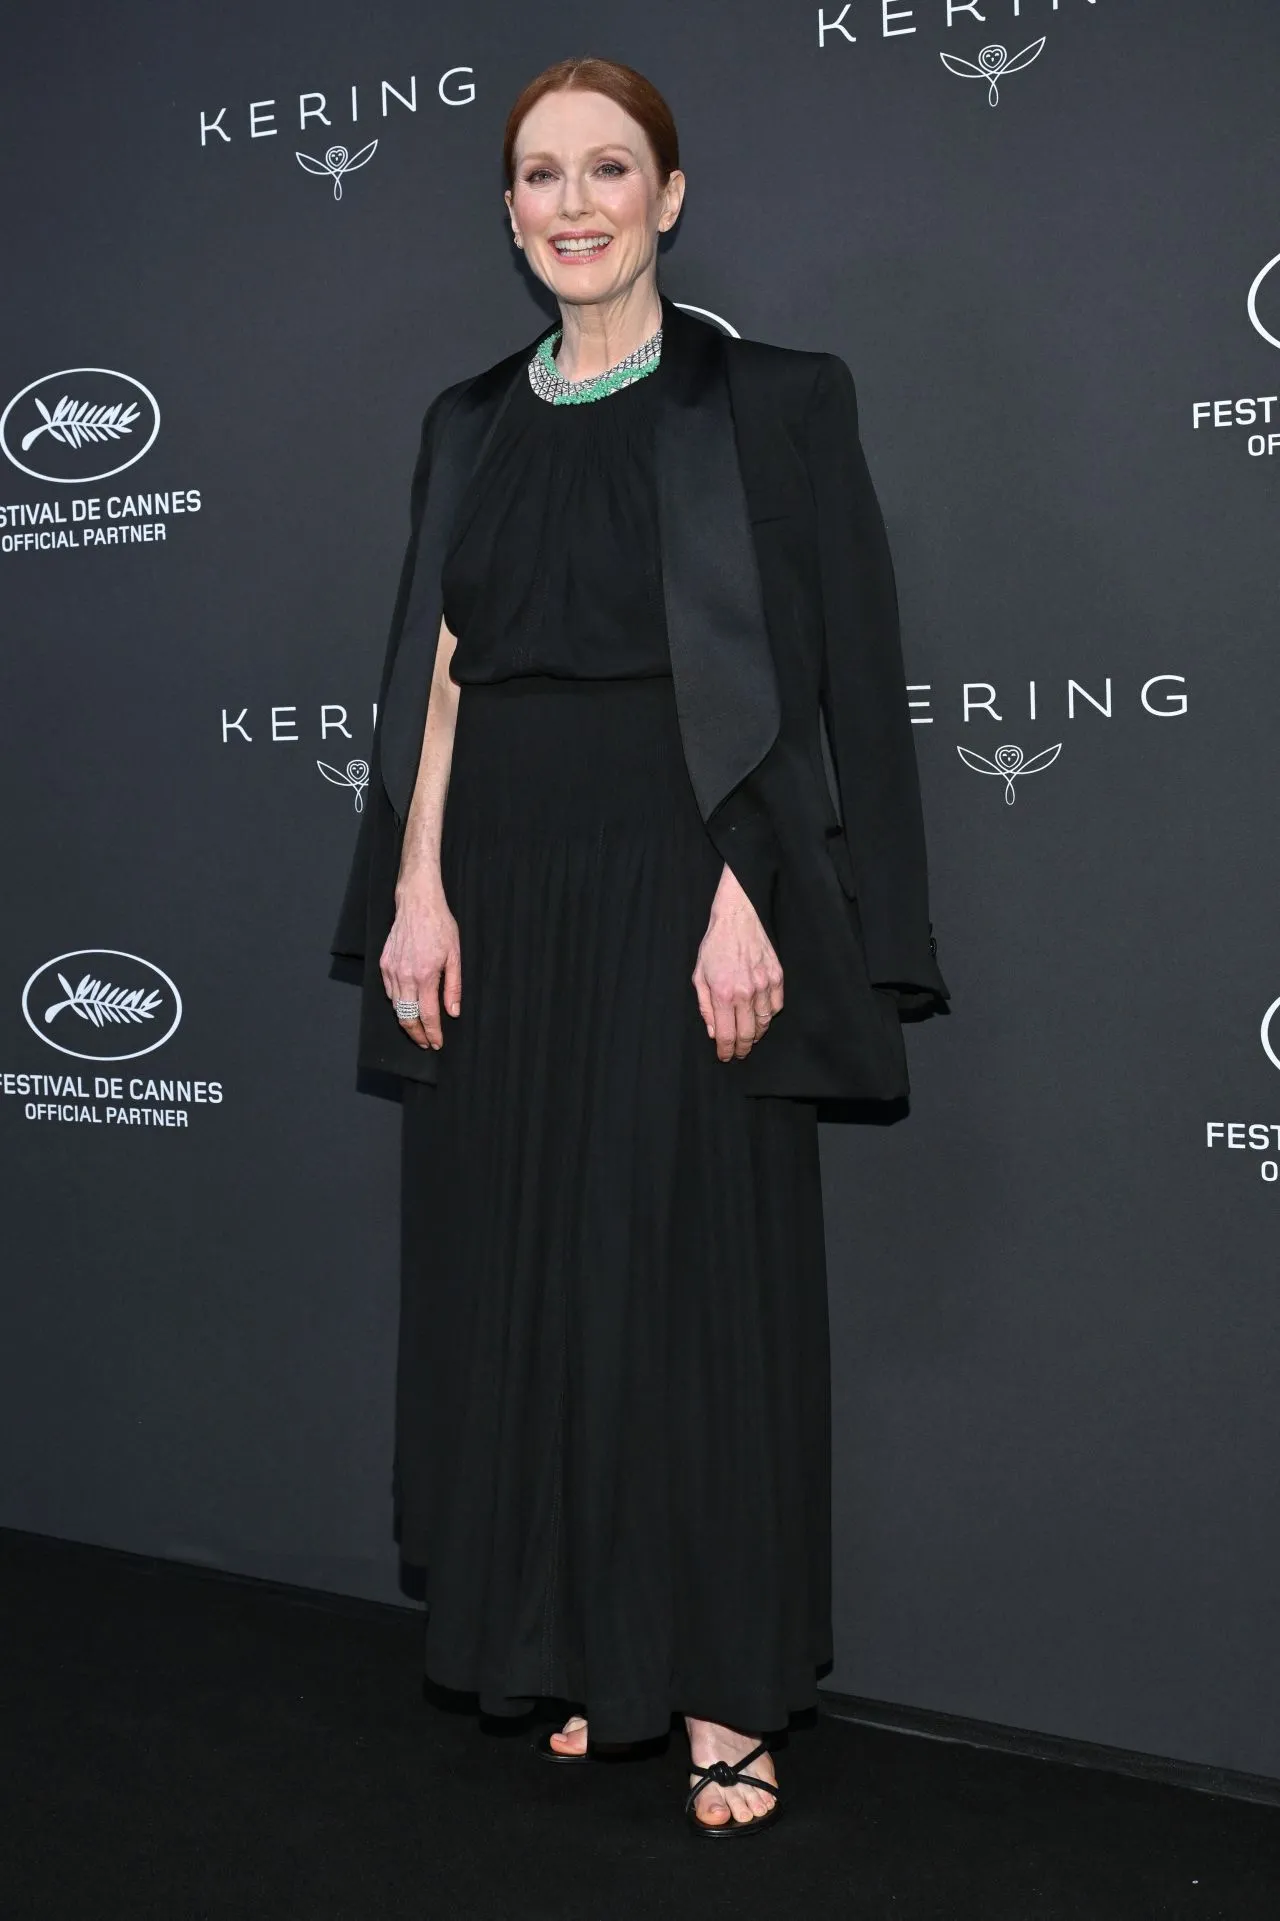 JULIANNE MOORE AT KERING WOMEN IN MOTION AWARDS AT CANNES FILM FESTIVAL5